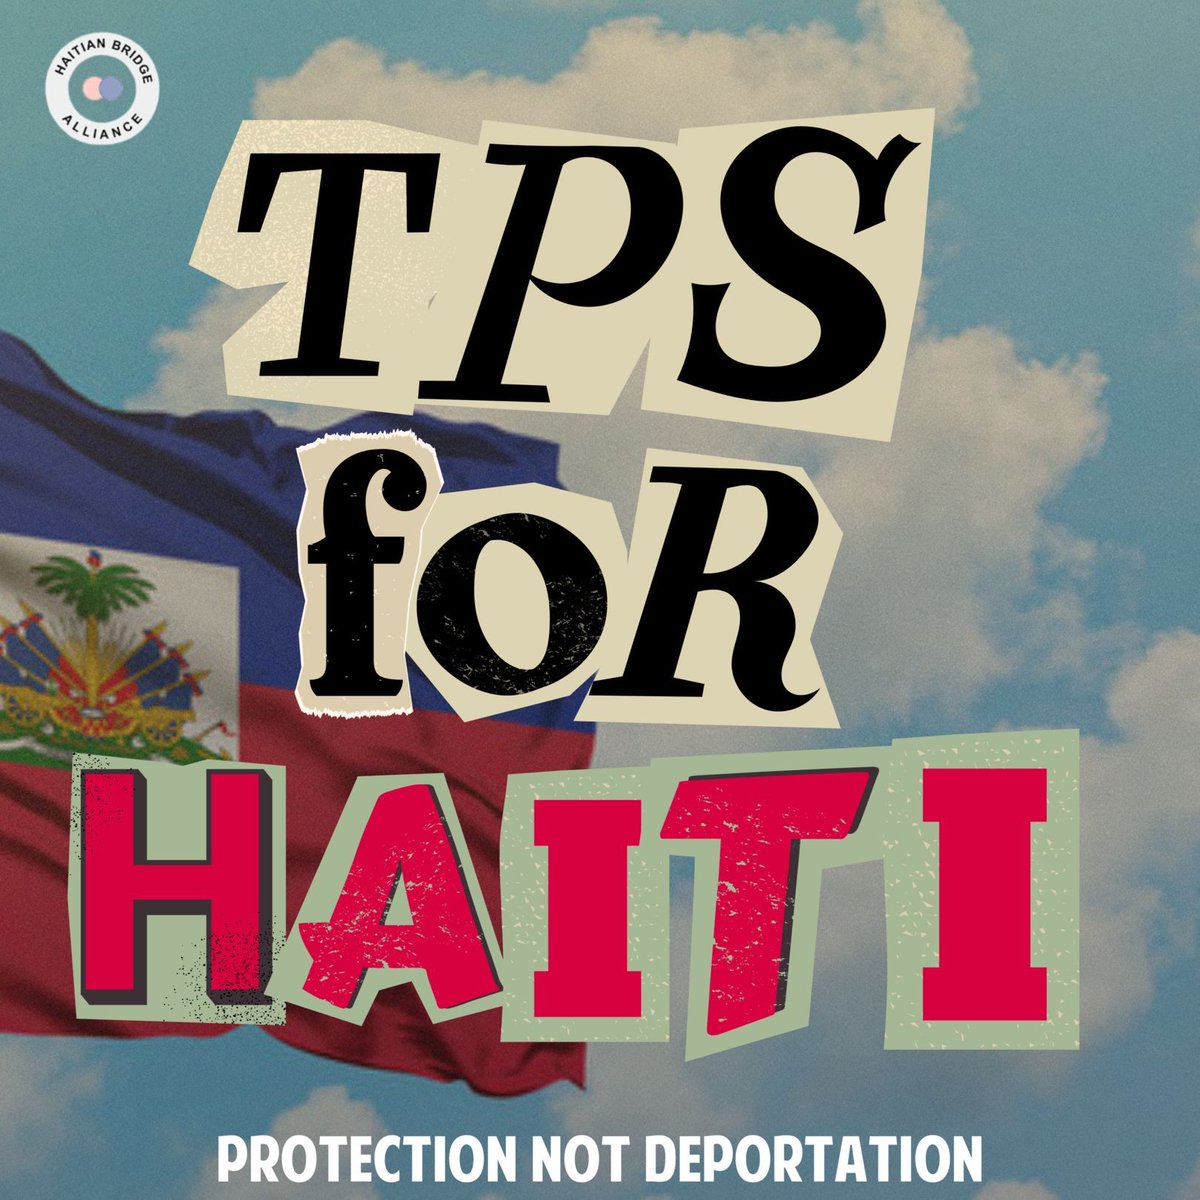 #TPSForHaiti means: ➡️ Safety ➡️ Keeping families together ➡️ Protection from deportation @Potus must redesignate TPS for Haiti now!!